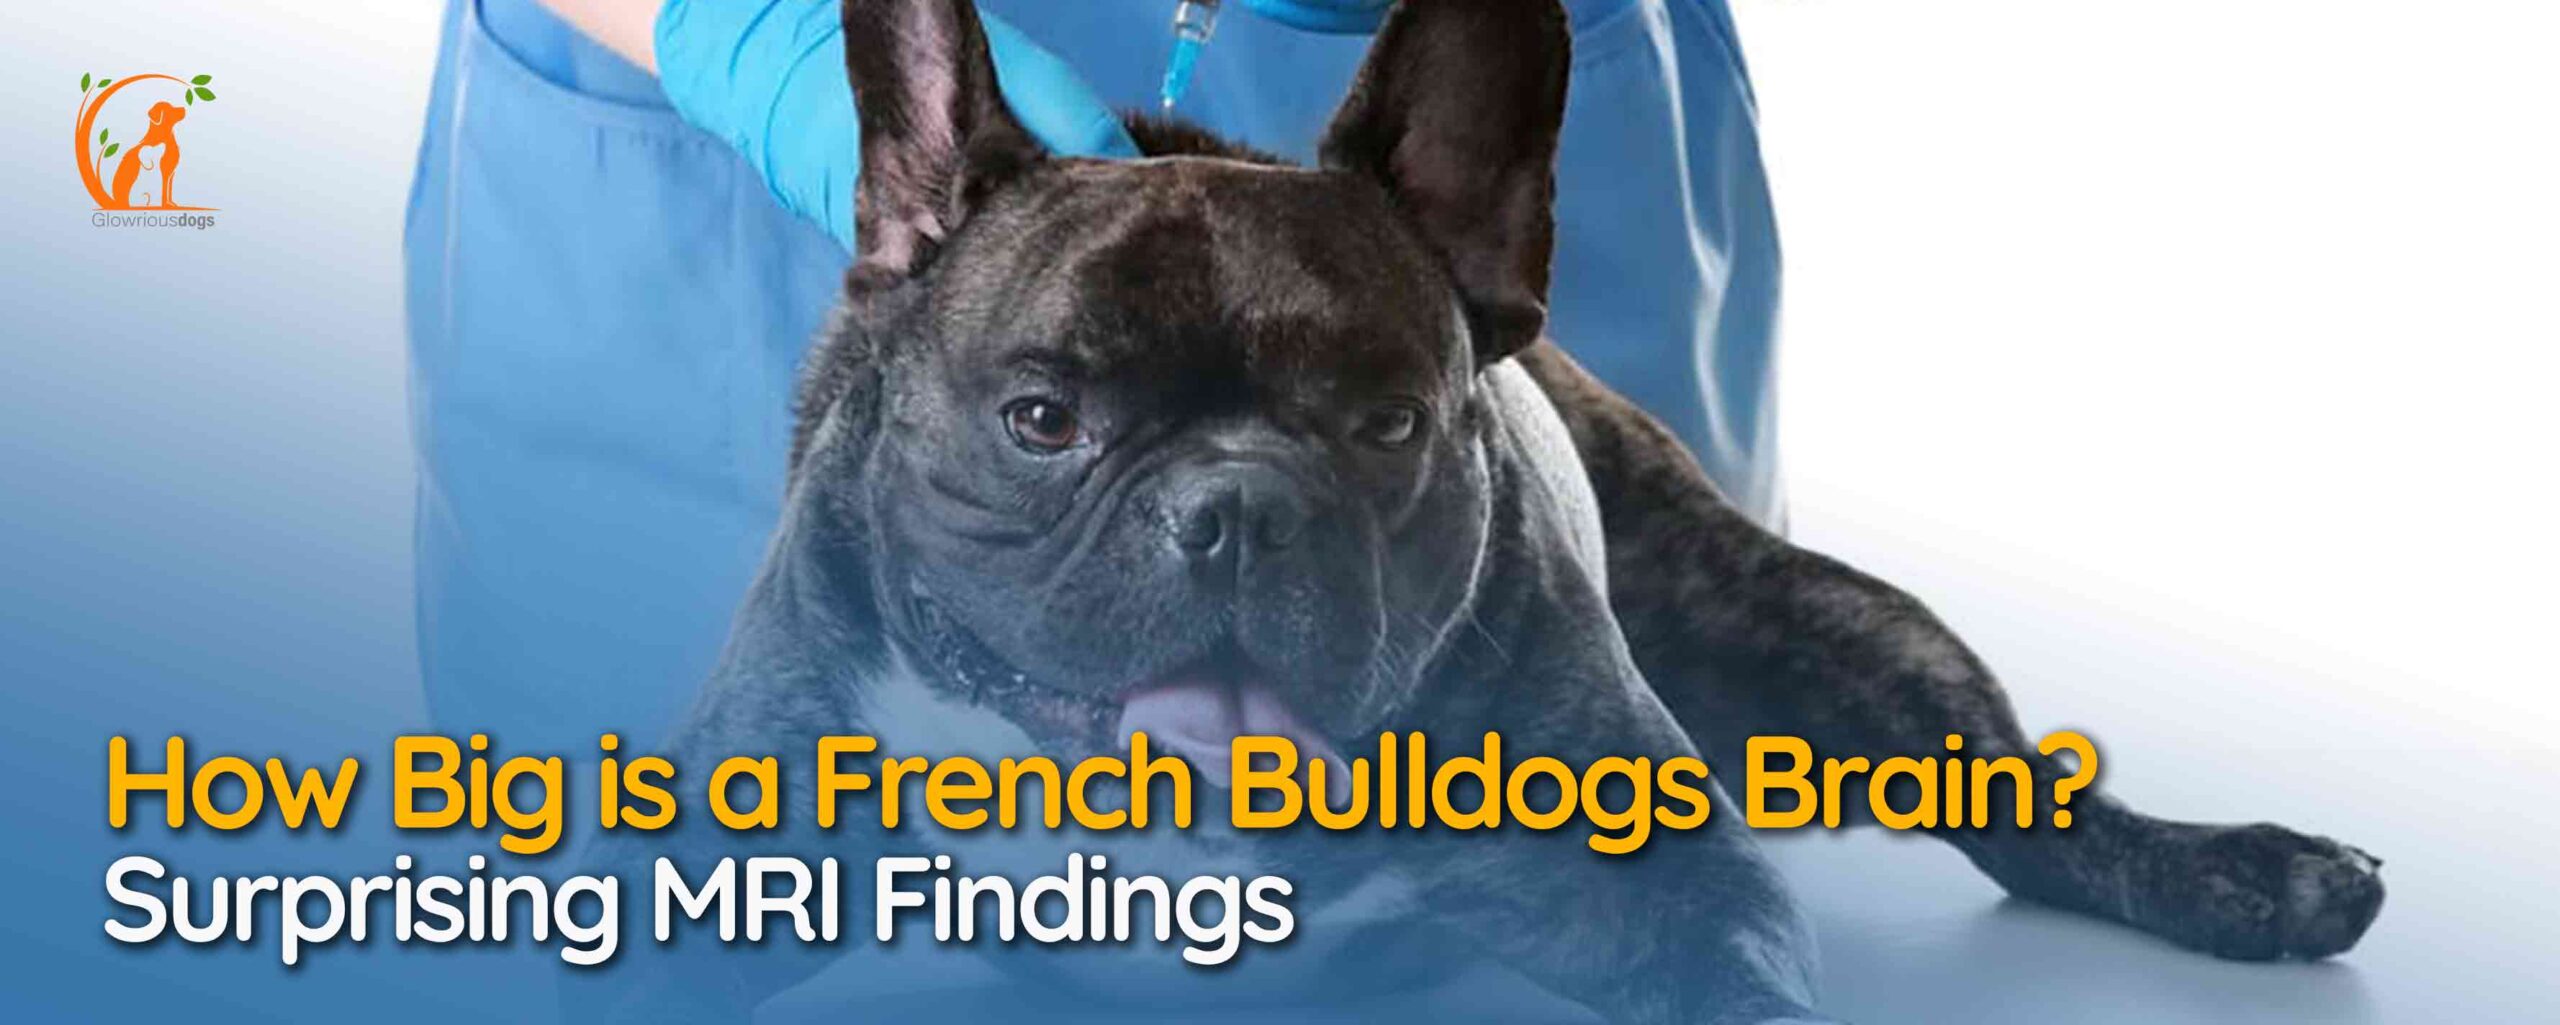 How Big is a French Bulldogs Brain